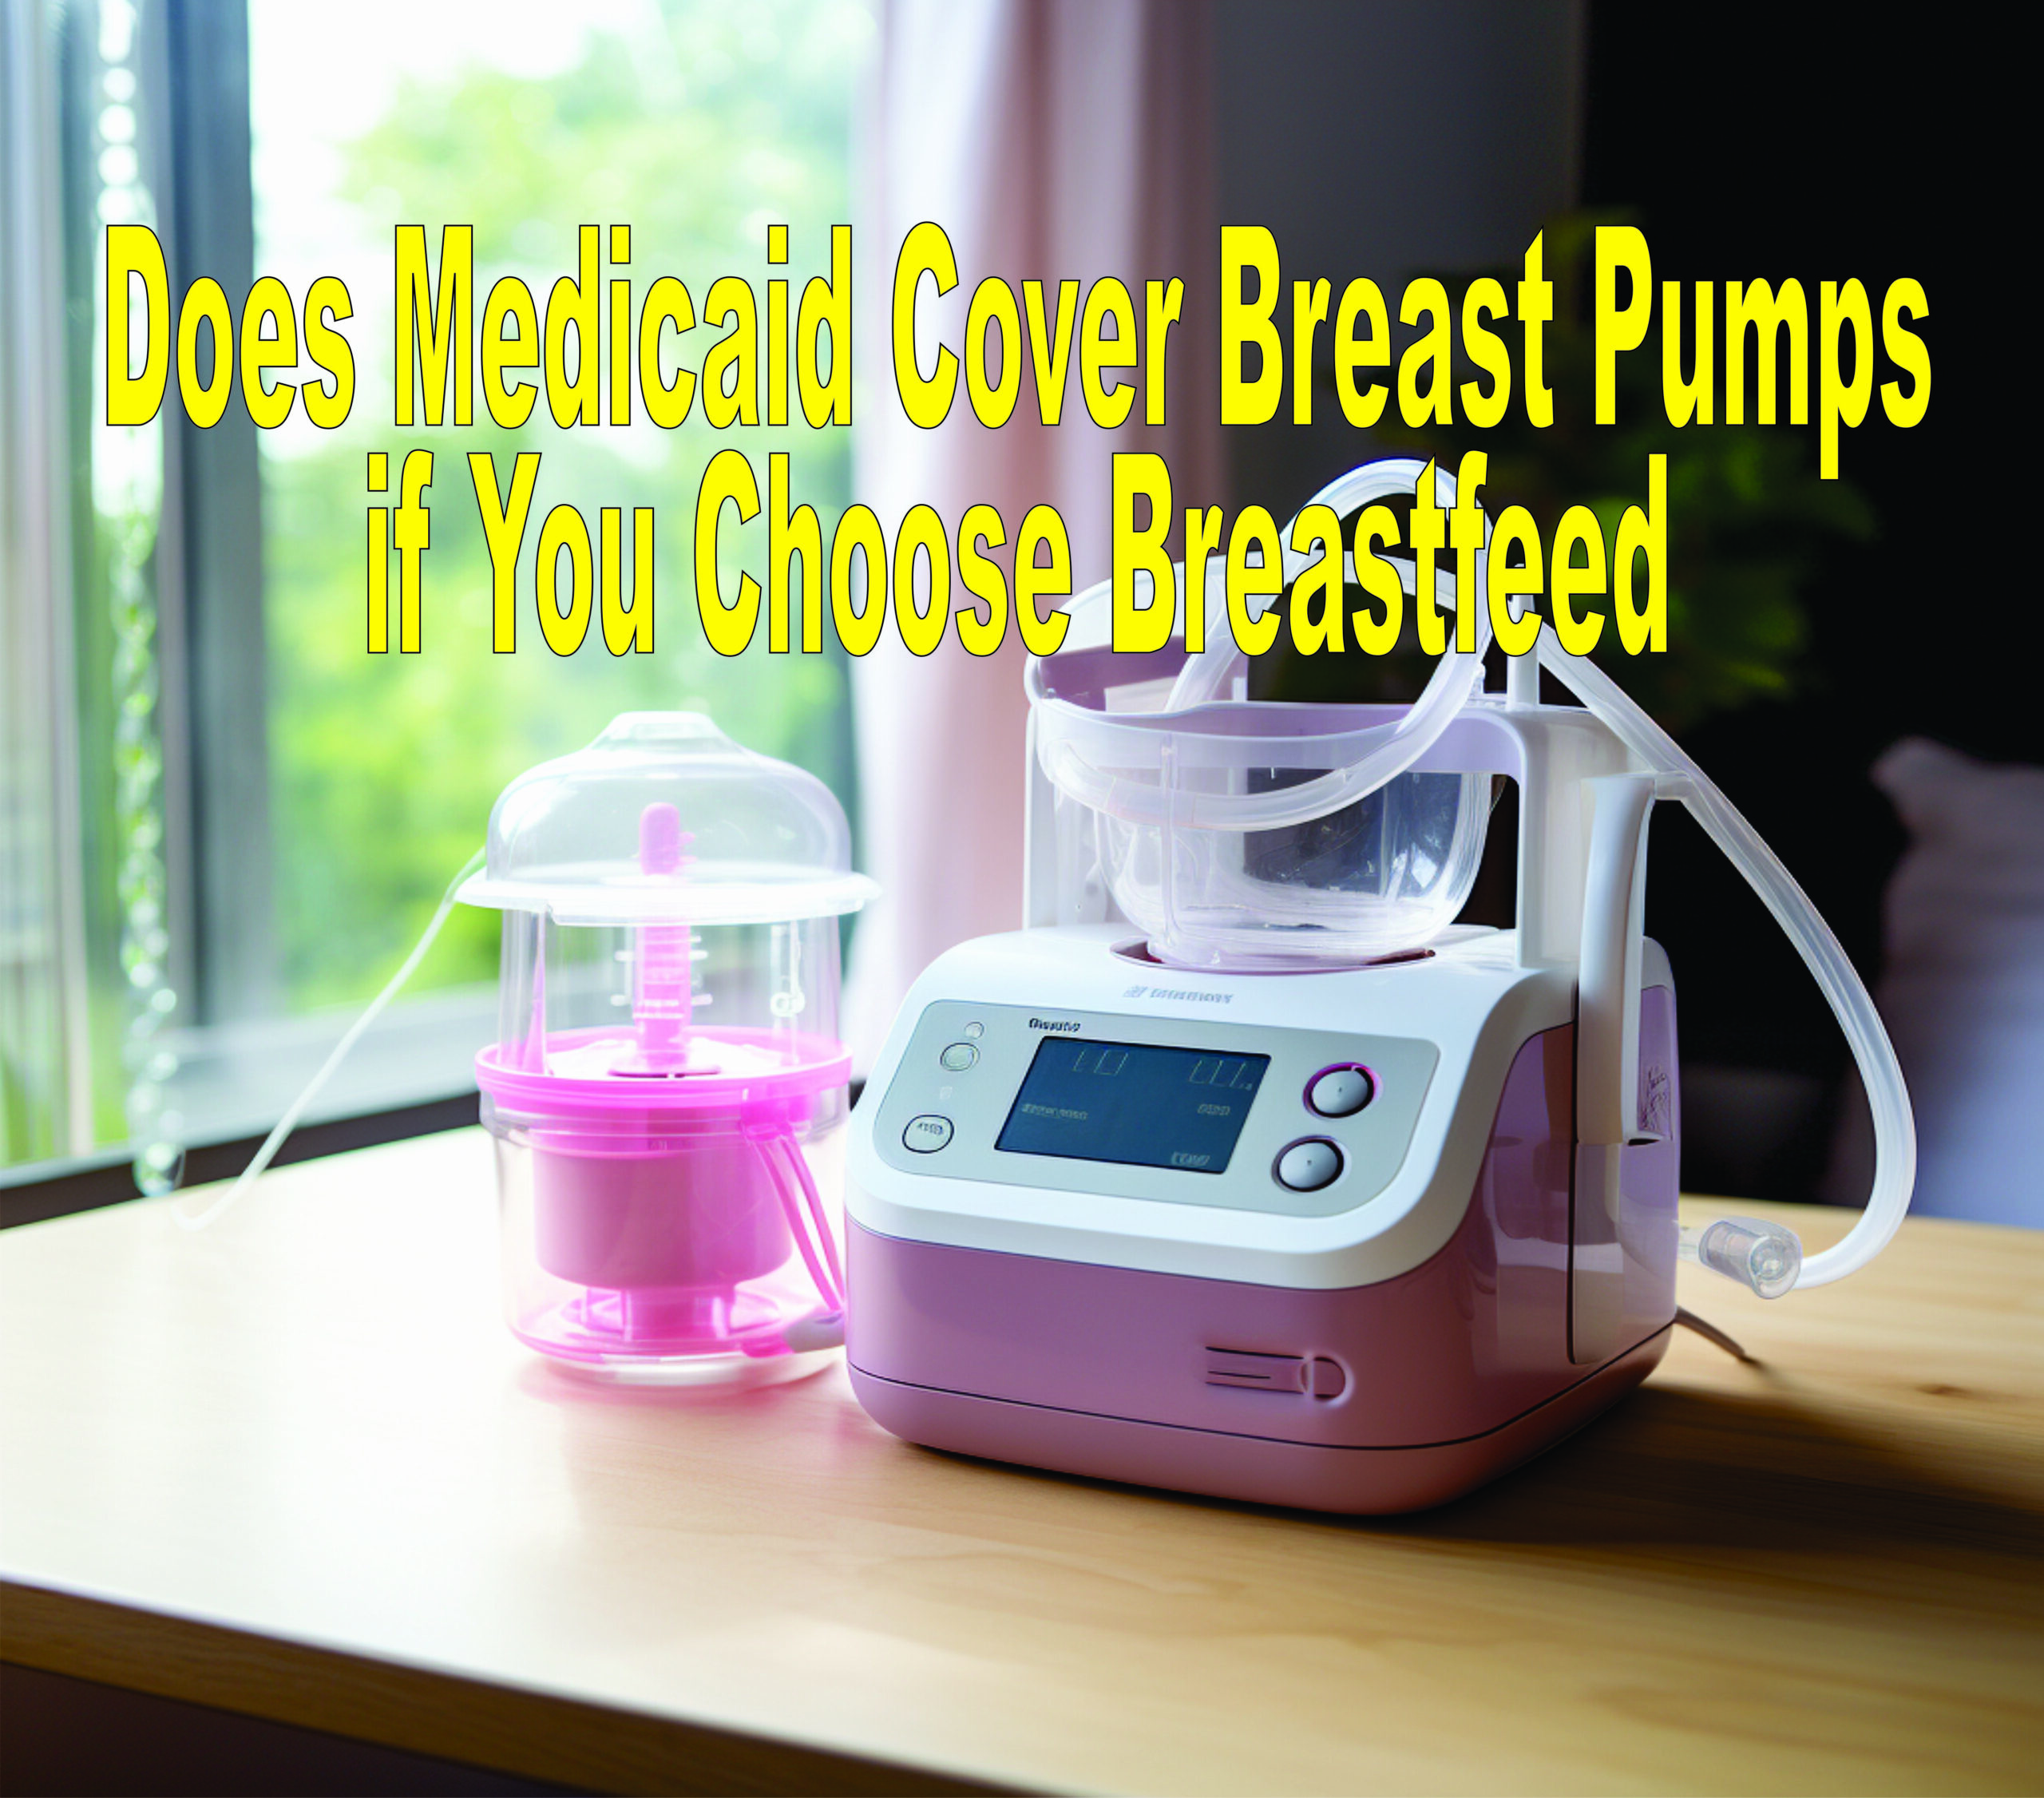 Does Medicaid Cover Breast Pumps If You Choose Breastfeed